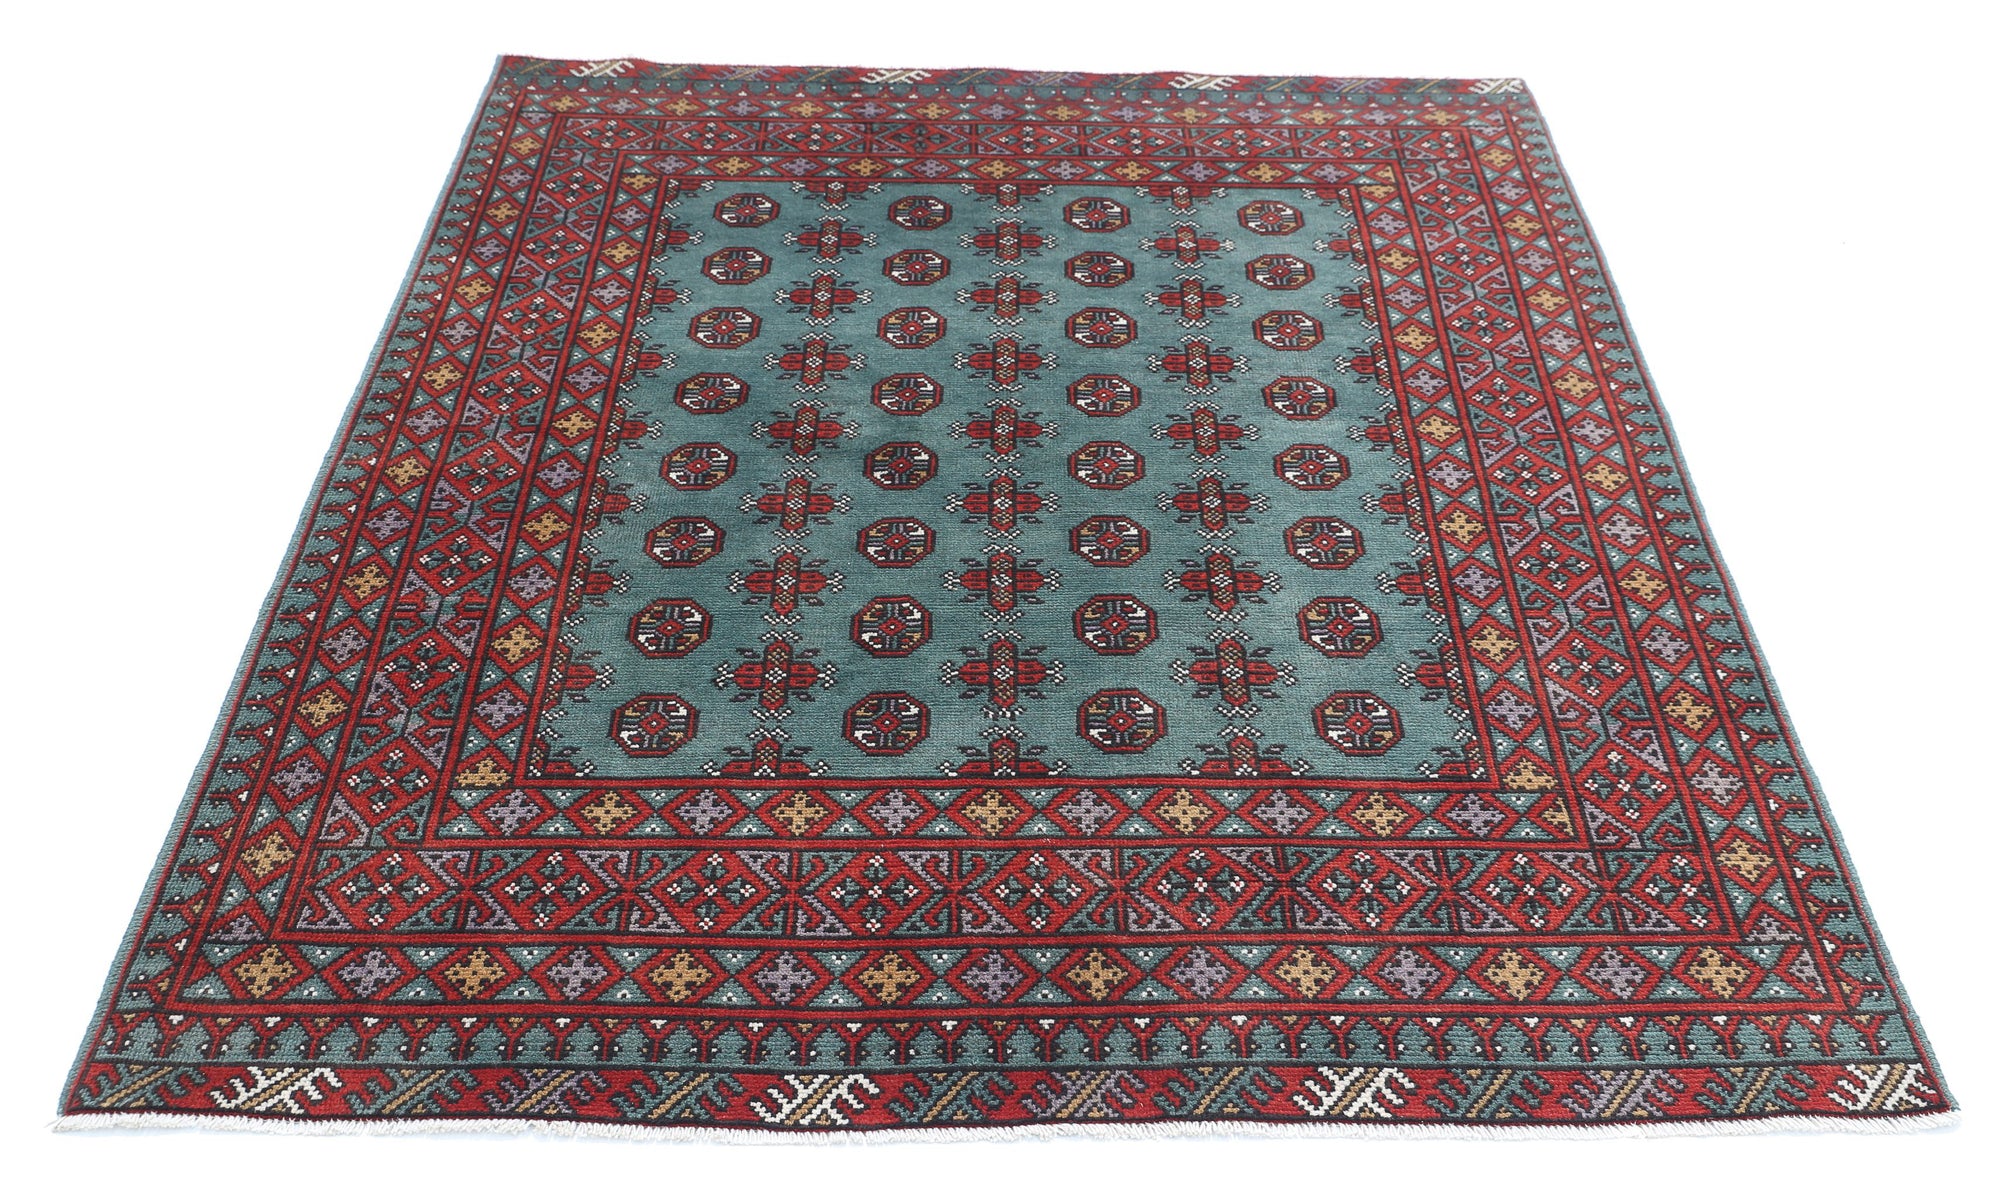 Revival-hand-knotted-gul-collection-wool-rug-5013927-3.jpg